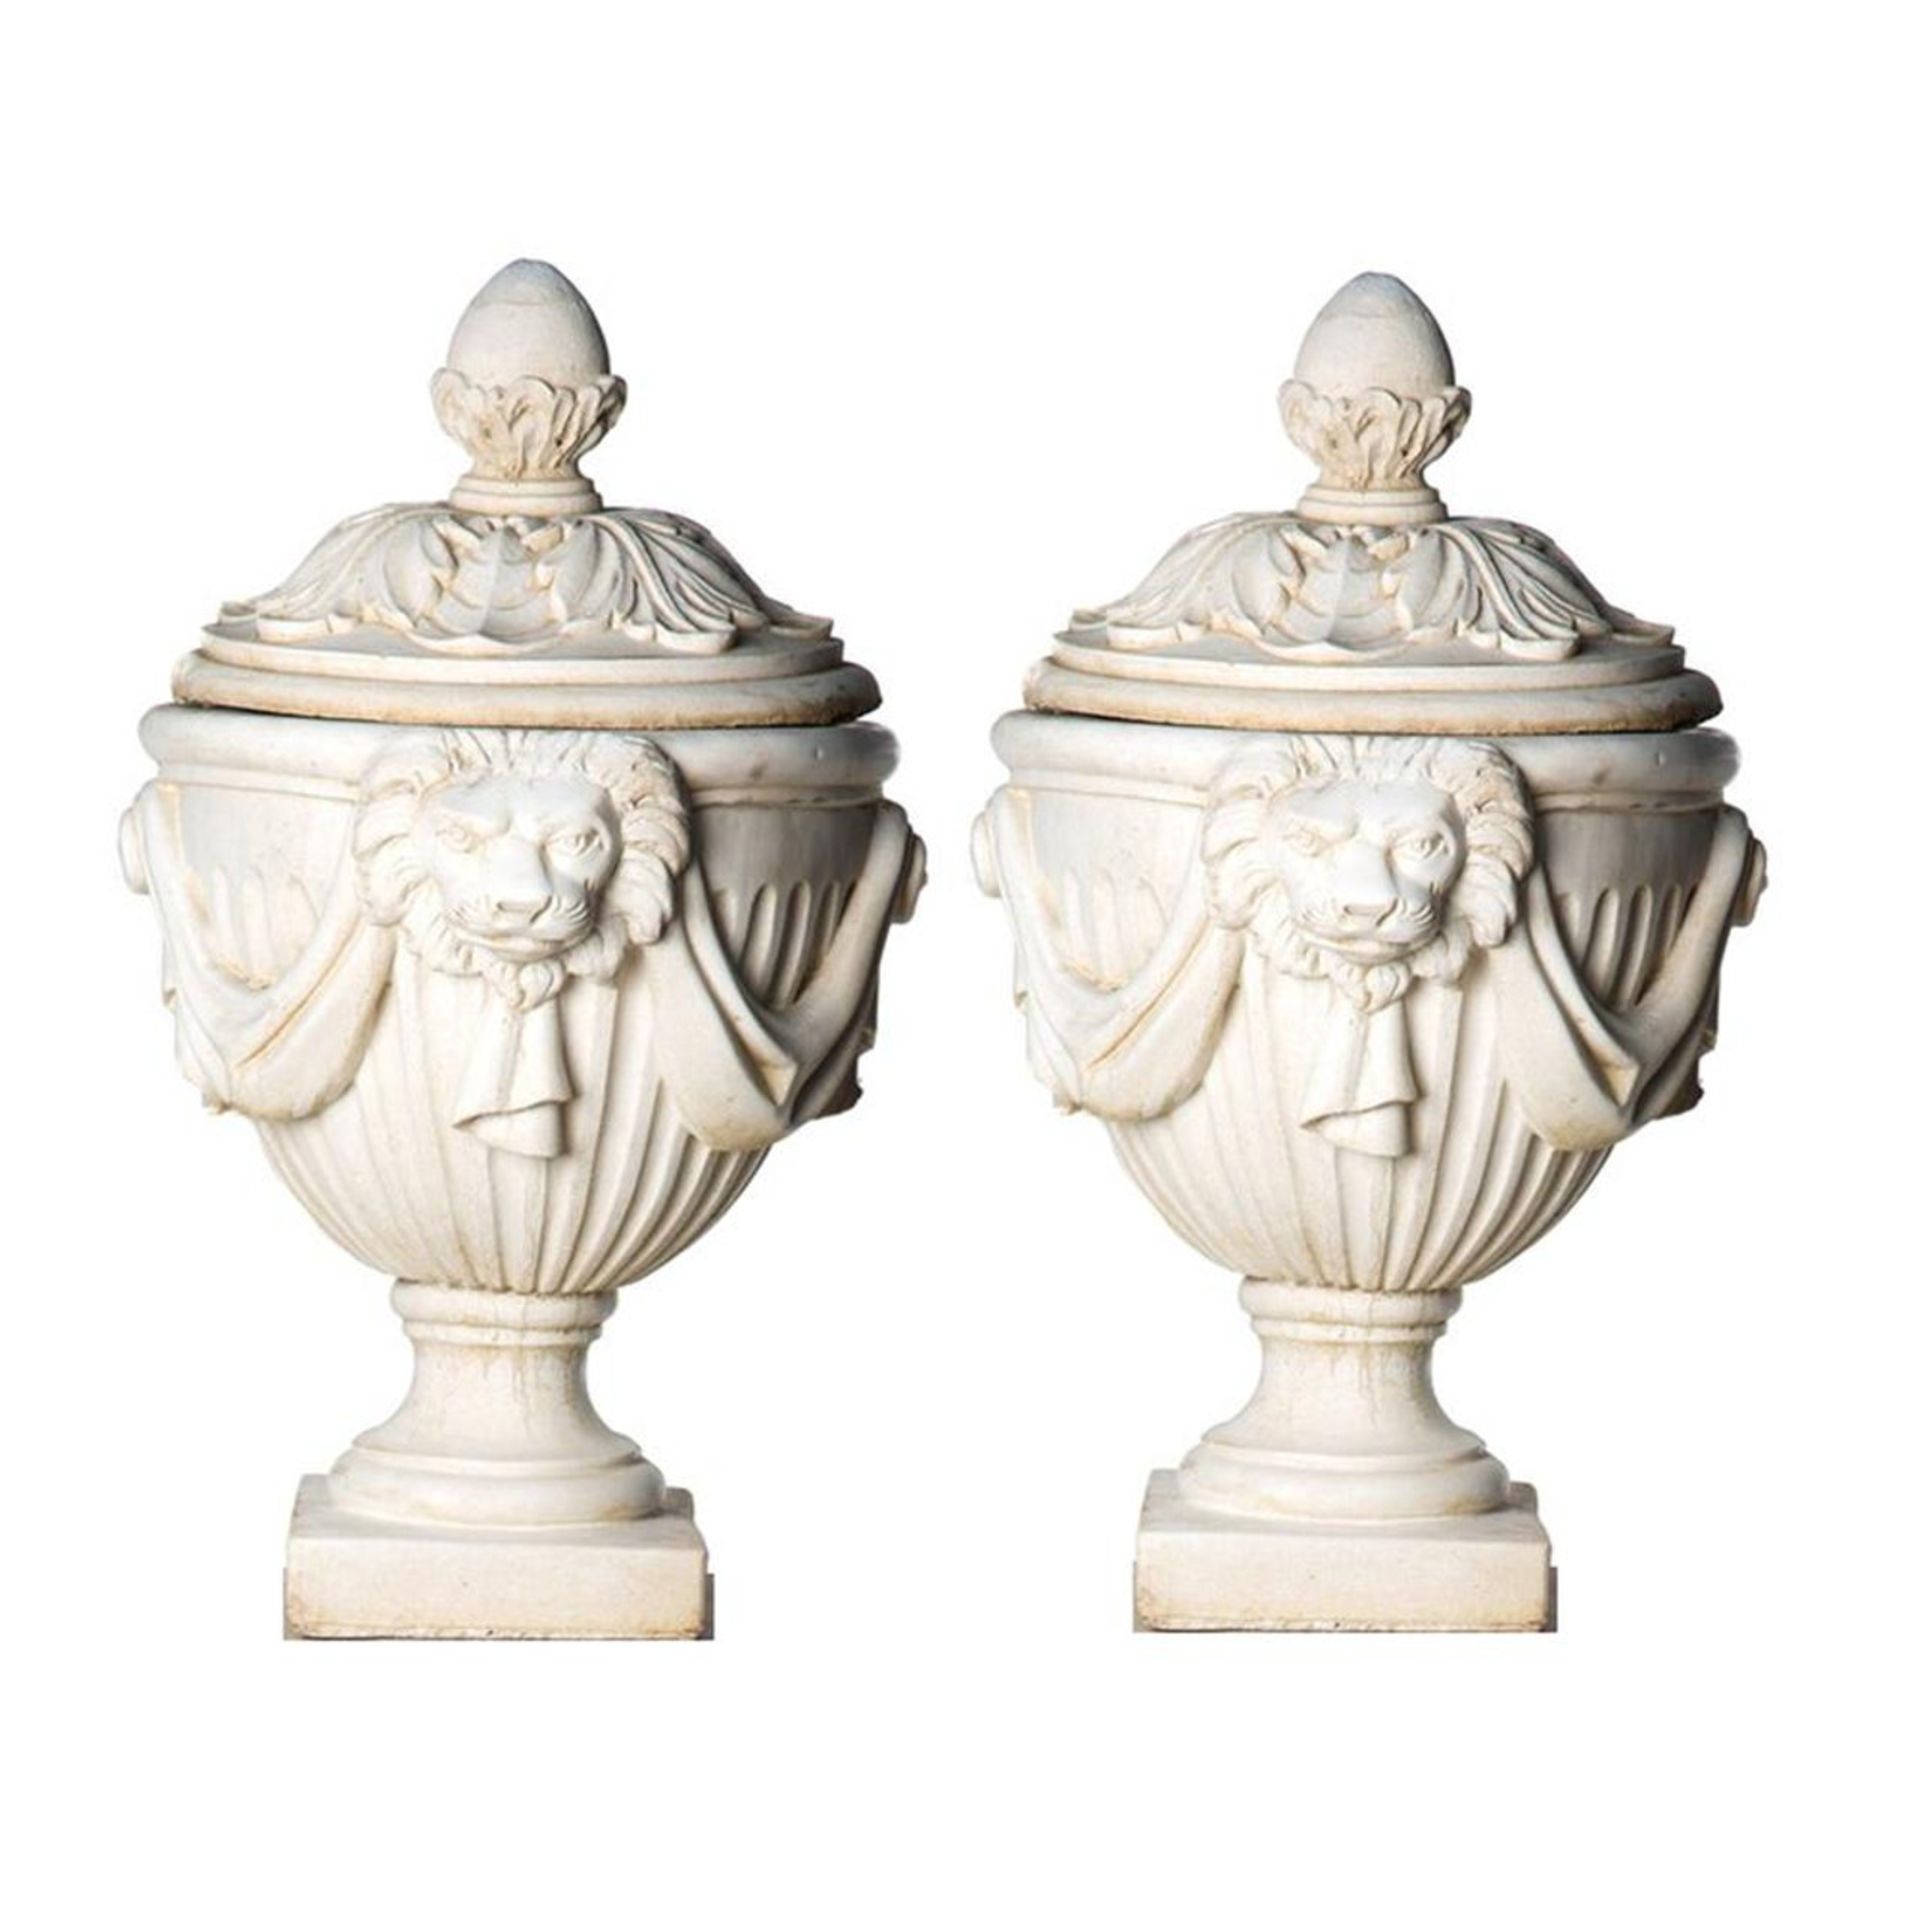 A Pair Of Very Large White Stone Cast Lion Head Design Continental Urns Cast In A White/ Cream Stone